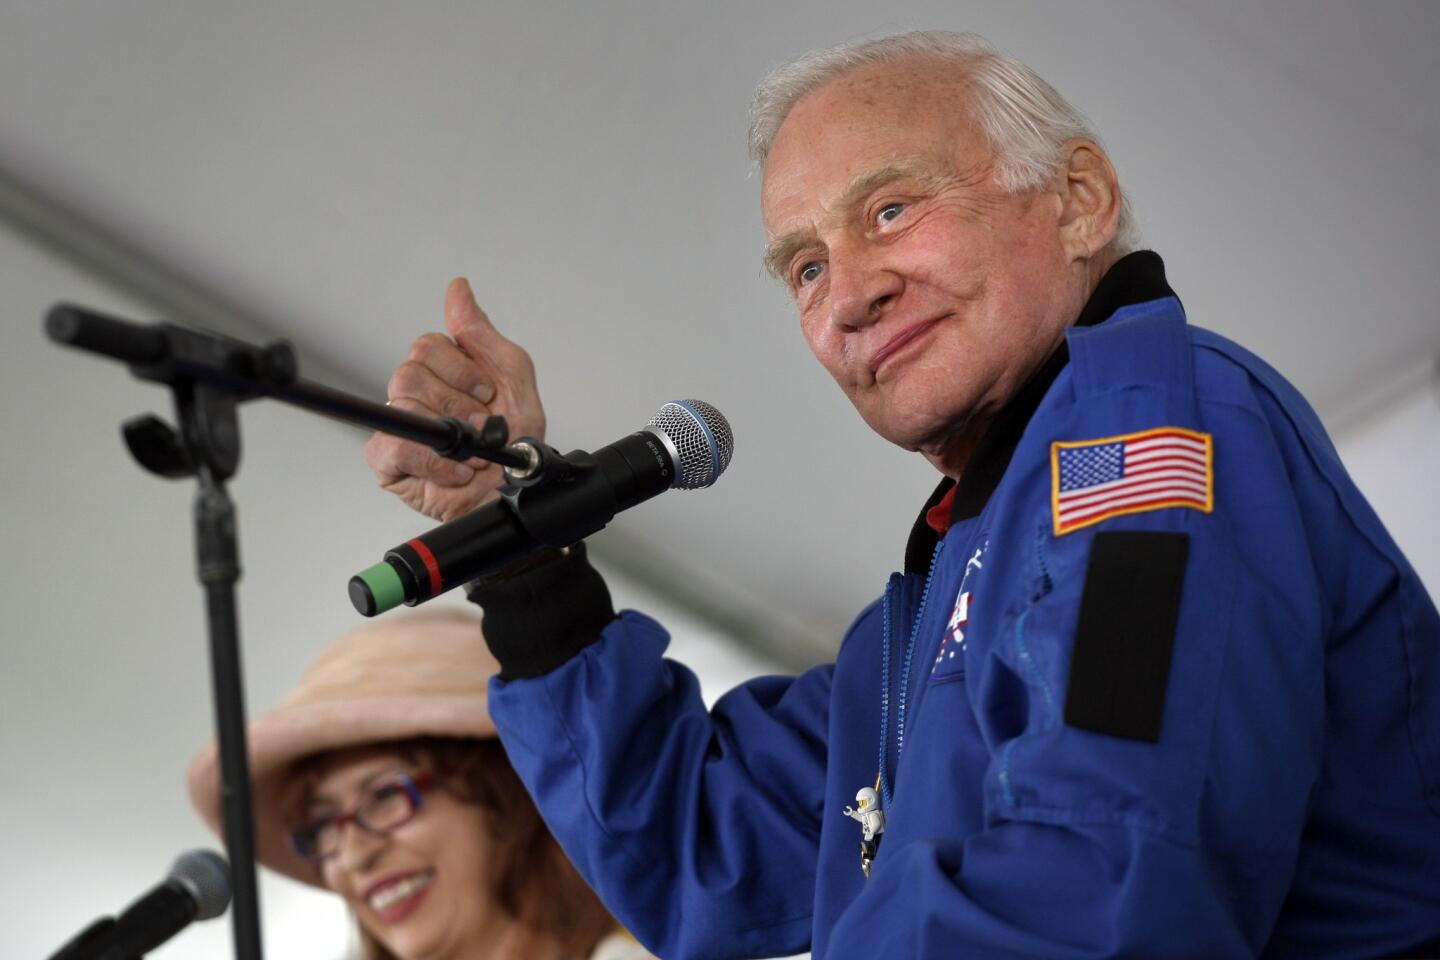 "Rest in Peace Nelson Mandela. A true inspiration & role model for peace & international collaboration. We will continue to learn from him." — @TheRealBuzz